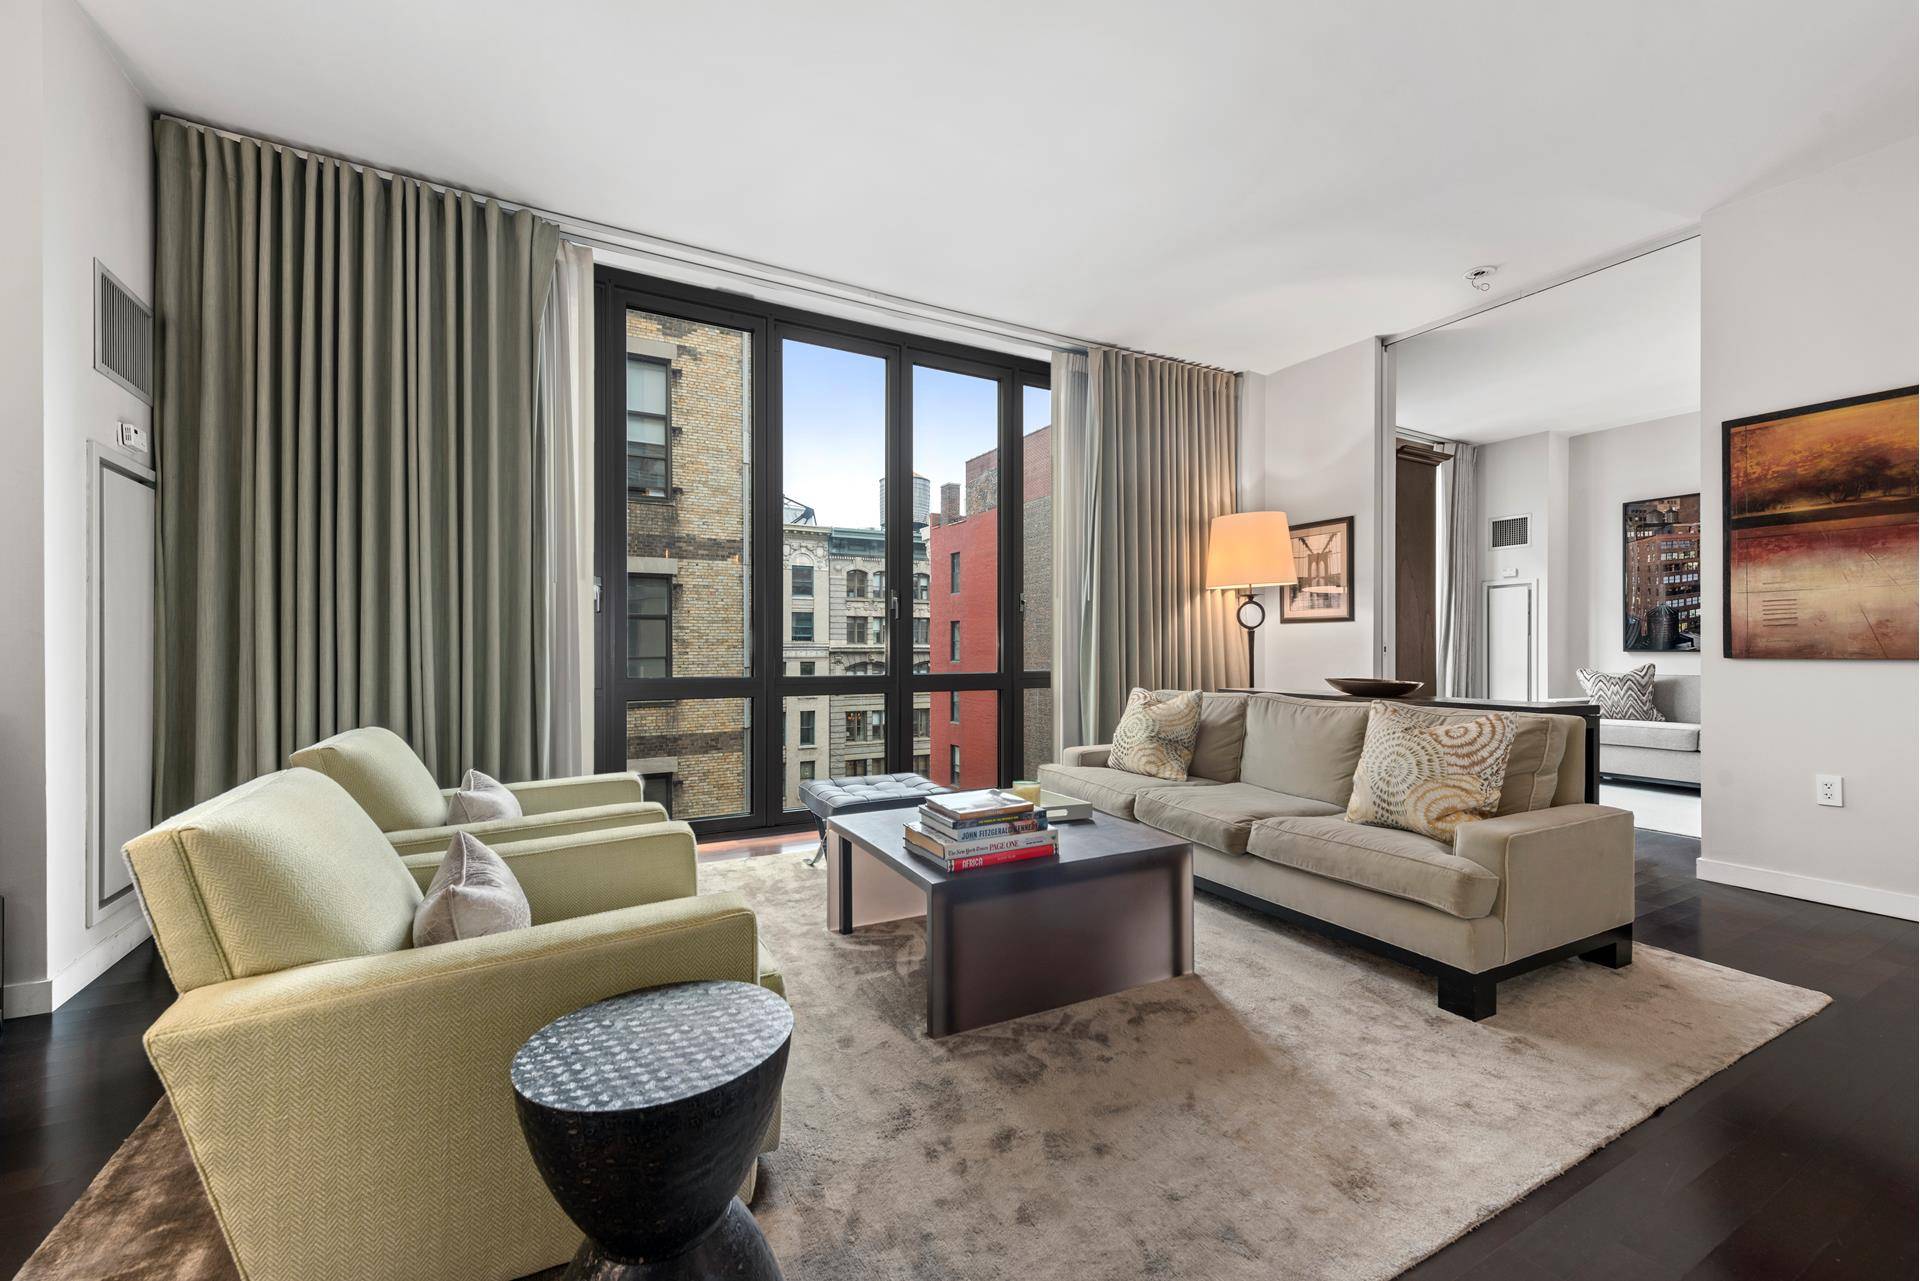 Residence 12A is thoughtfully designed two bedroom loft in the heart of the Flatiron district.